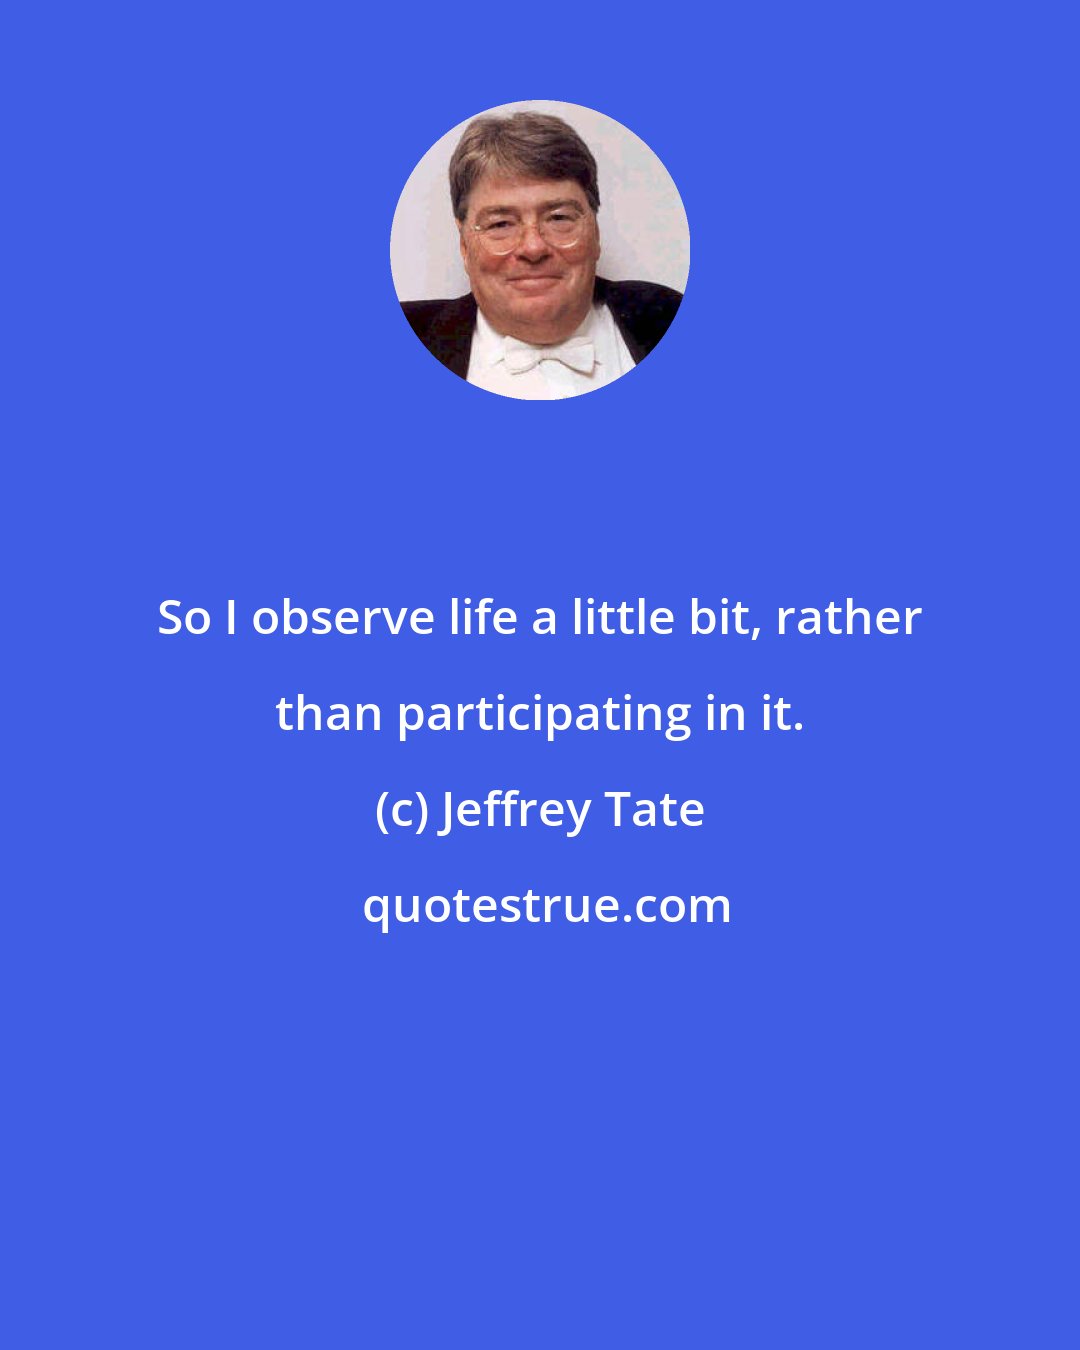 Jeffrey Tate: So I observe life a little bit, rather than participating in it.